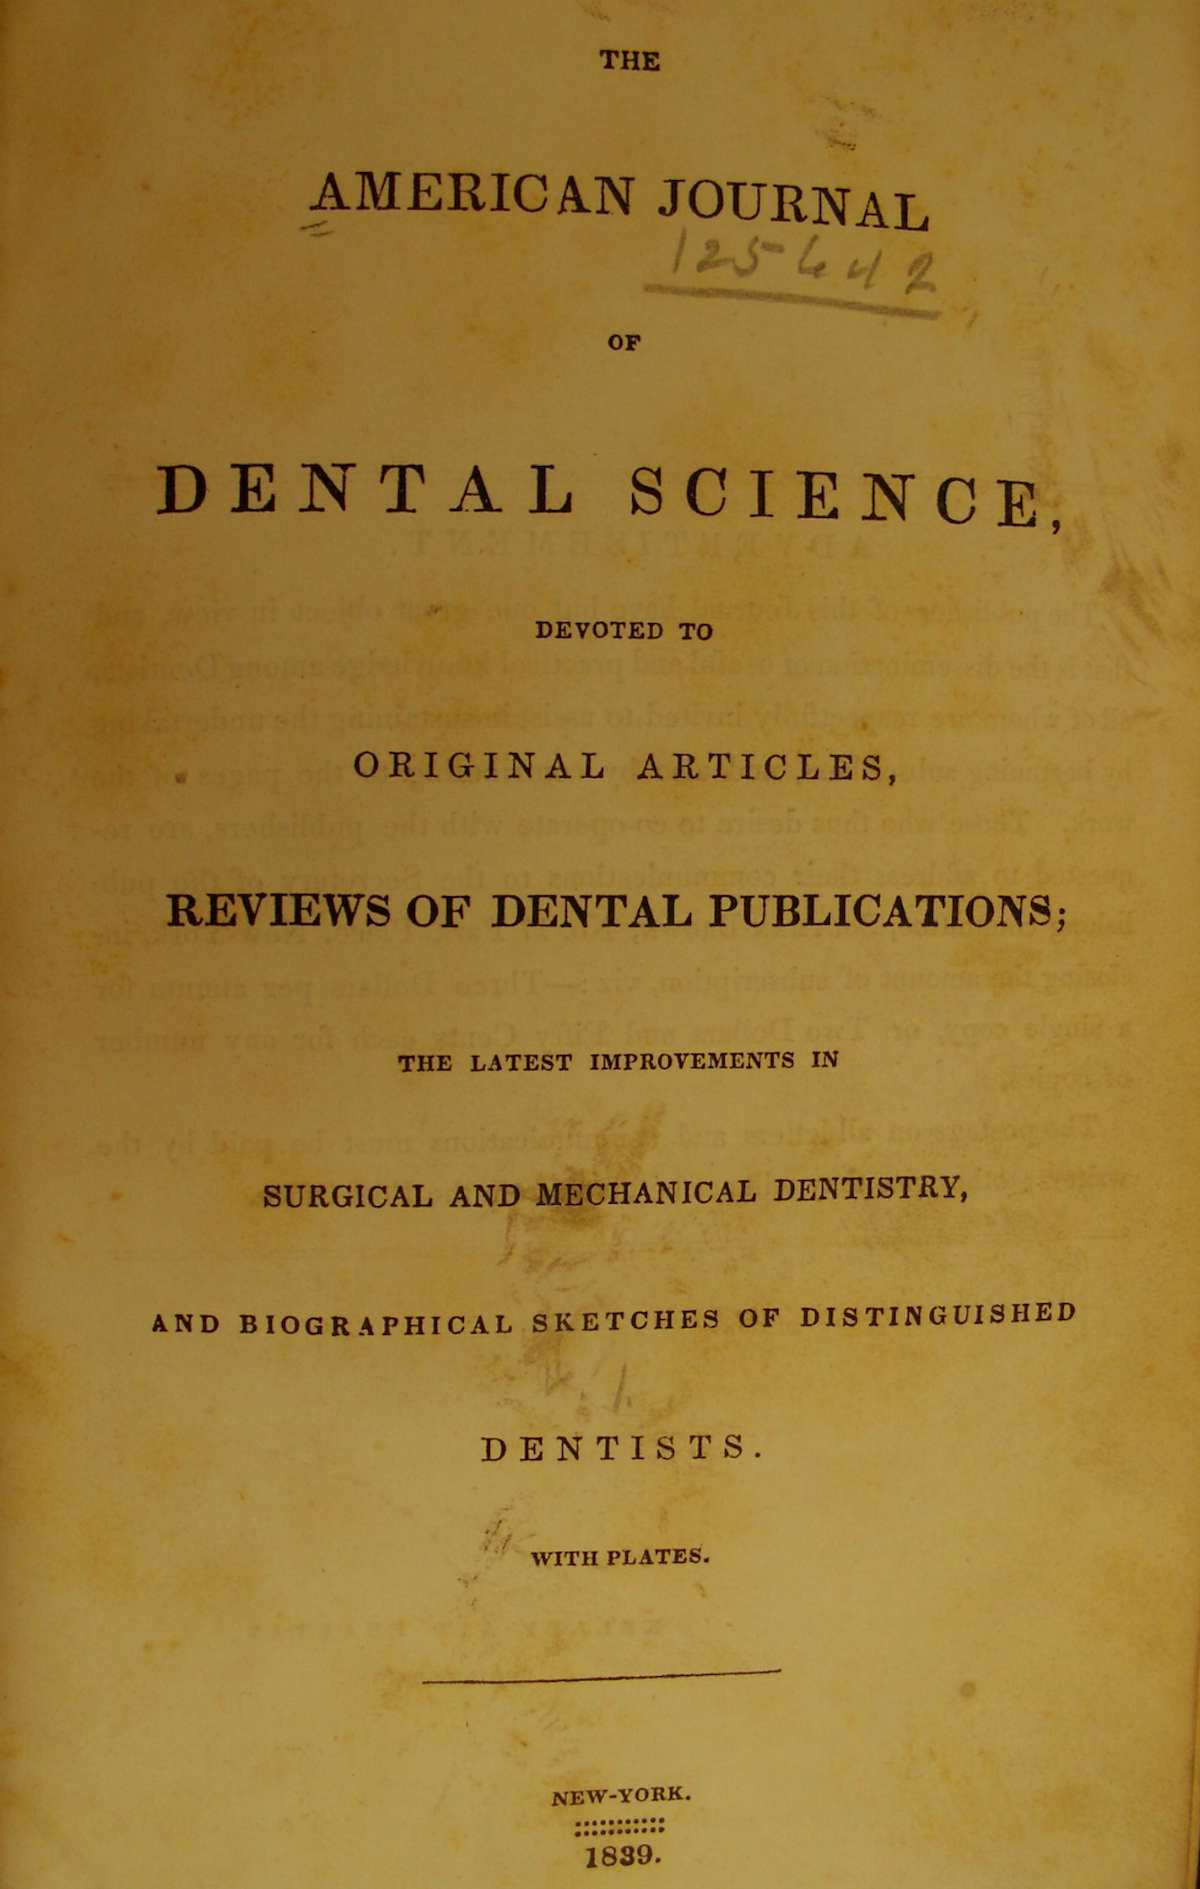 The first dental journal, American Journal of Dental Science is launched.